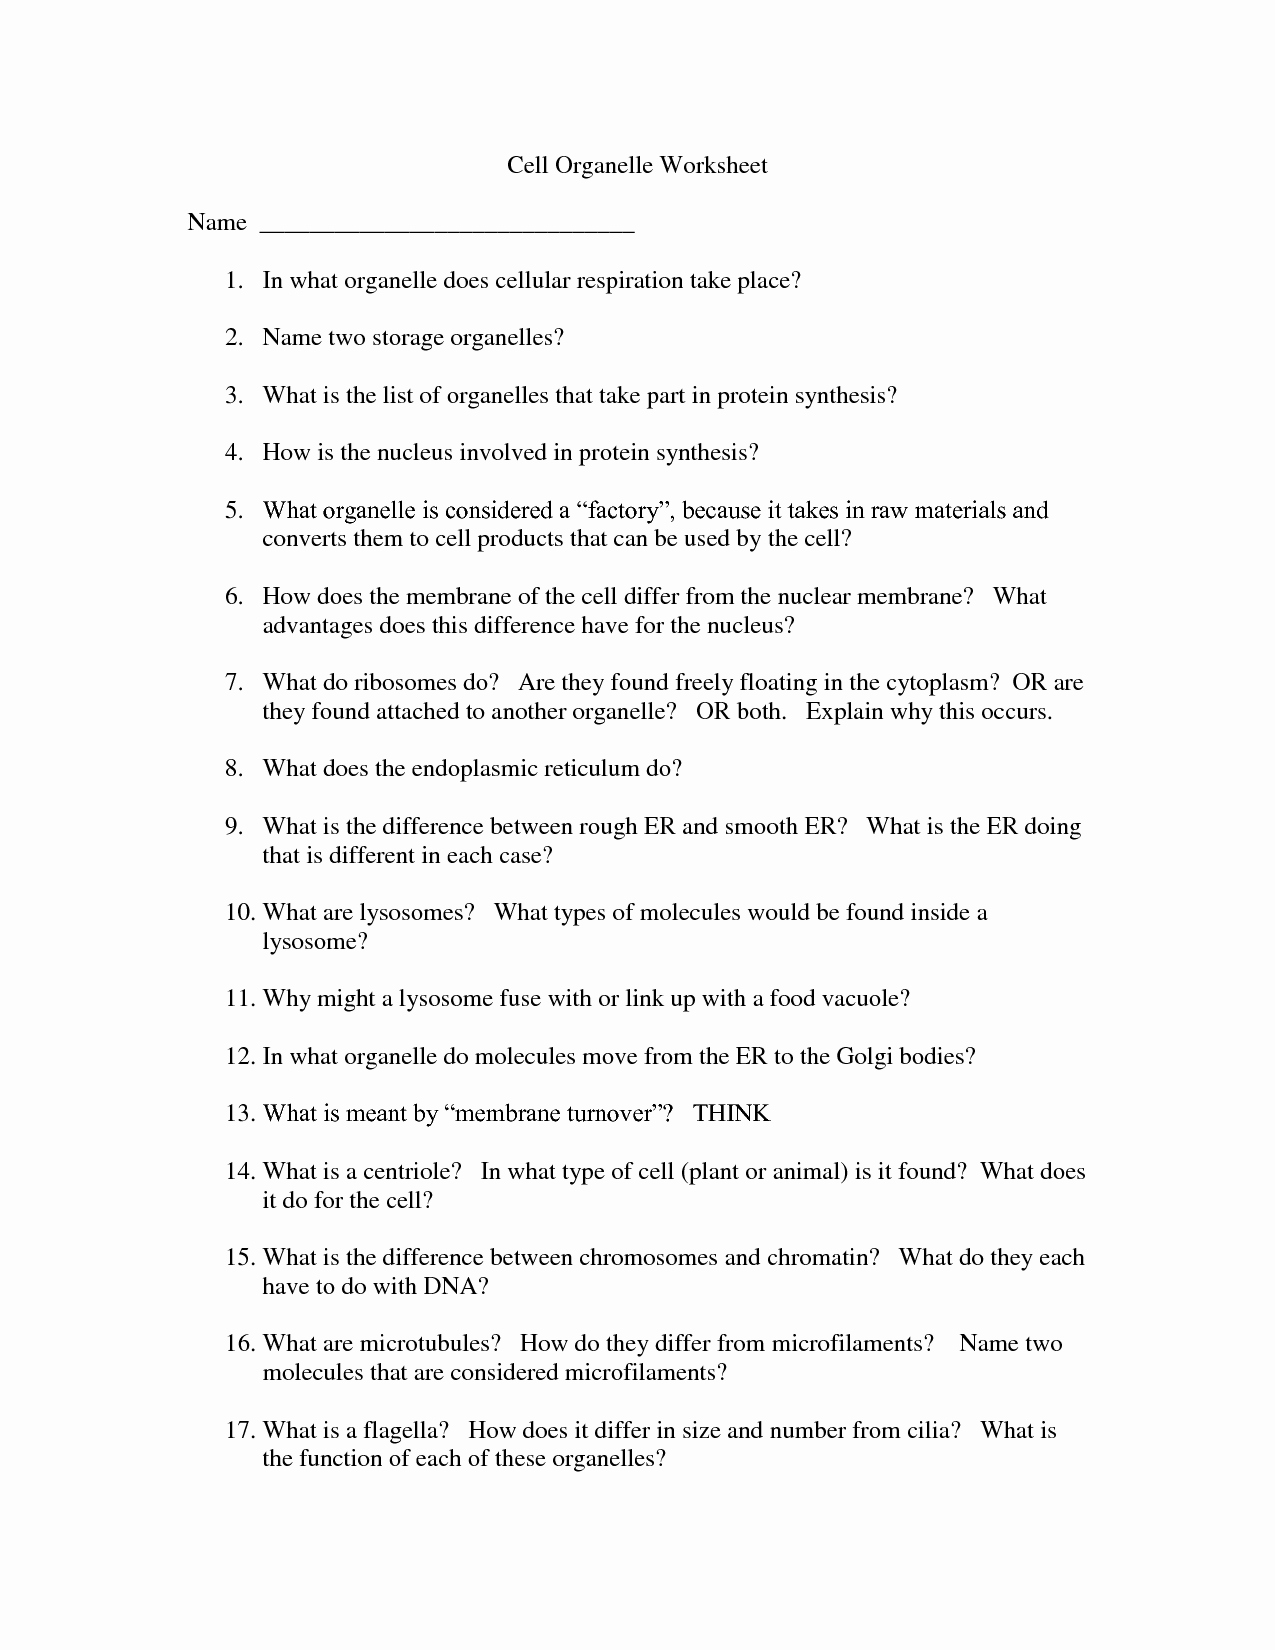 Cell organelles Worksheet Answers Luxury 16 Best Of Cells and their organelles Worksheet